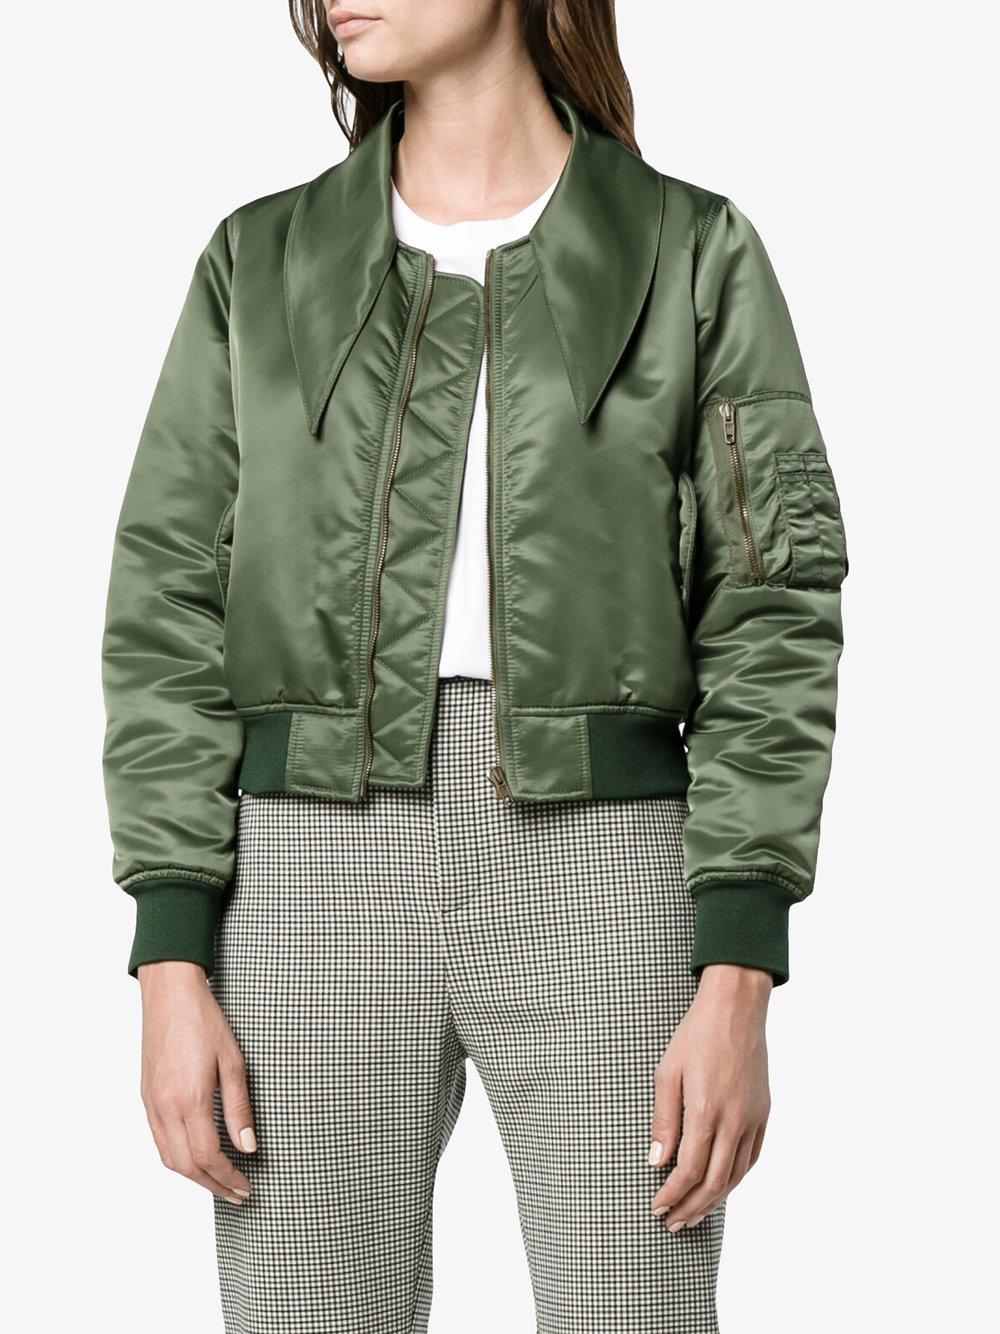 Balenciaga Scarf Tie Cropped Bomber in Green - Lyst